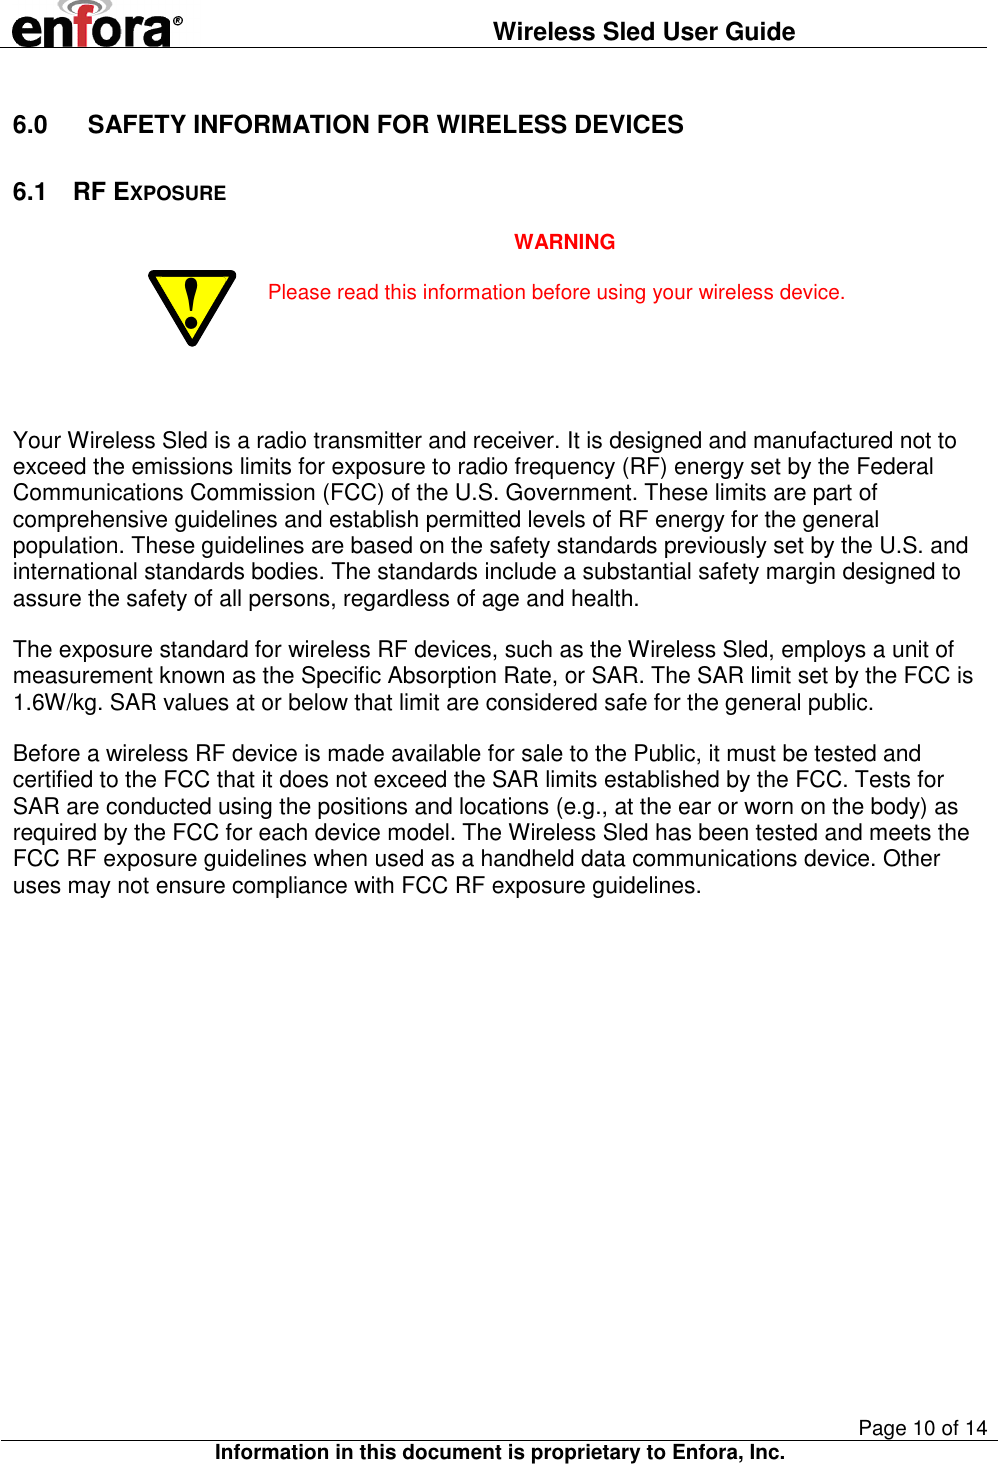  Wireless Sled User Guide       Page 10 of 14 Information in this document is proprietary to Enfora, Inc.  6.0  SAFETY INFORMATION FOR WIRELESS DEVICES 6.1  RF EXPOSURE ! WARNING Please read this information before using your wireless device.   Your Wireless Sled is a radio transmitter and receiver. It is designed and manufactured not to exceed the emissions limits for exposure to radio frequency (RF) energy set by the Federal Communications Commission (FCC) of the U.S. Government. These limits are part of comprehensive guidelines and establish permitted levels of RF energy for the general population. These guidelines are based on the safety standards previously set by the U.S. and international standards bodies. The standards include a substantial safety margin designed to assure the safety of all persons, regardless of age and health.  The exposure standard for wireless RF devices, such as the Wireless Sled, employs a unit of measurement known as the Specific Absorption Rate, or SAR. The SAR limit set by the FCC is 1.6W/kg. SAR values at or below that limit are considered safe for the general public. Before a wireless RF device is made available for sale to the Public, it must be tested and certified to the FCC that it does not exceed the SAR limits established by the FCC. Tests for SAR are conducted using the positions and locations (e.g., at the ear or worn on the body) as required by the FCC for each device model. The Wireless Sled has been tested and meets the FCC RF exposure guidelines when used as a handheld data communications device. Other uses may not ensure compliance with FCC RF exposure guidelines. 